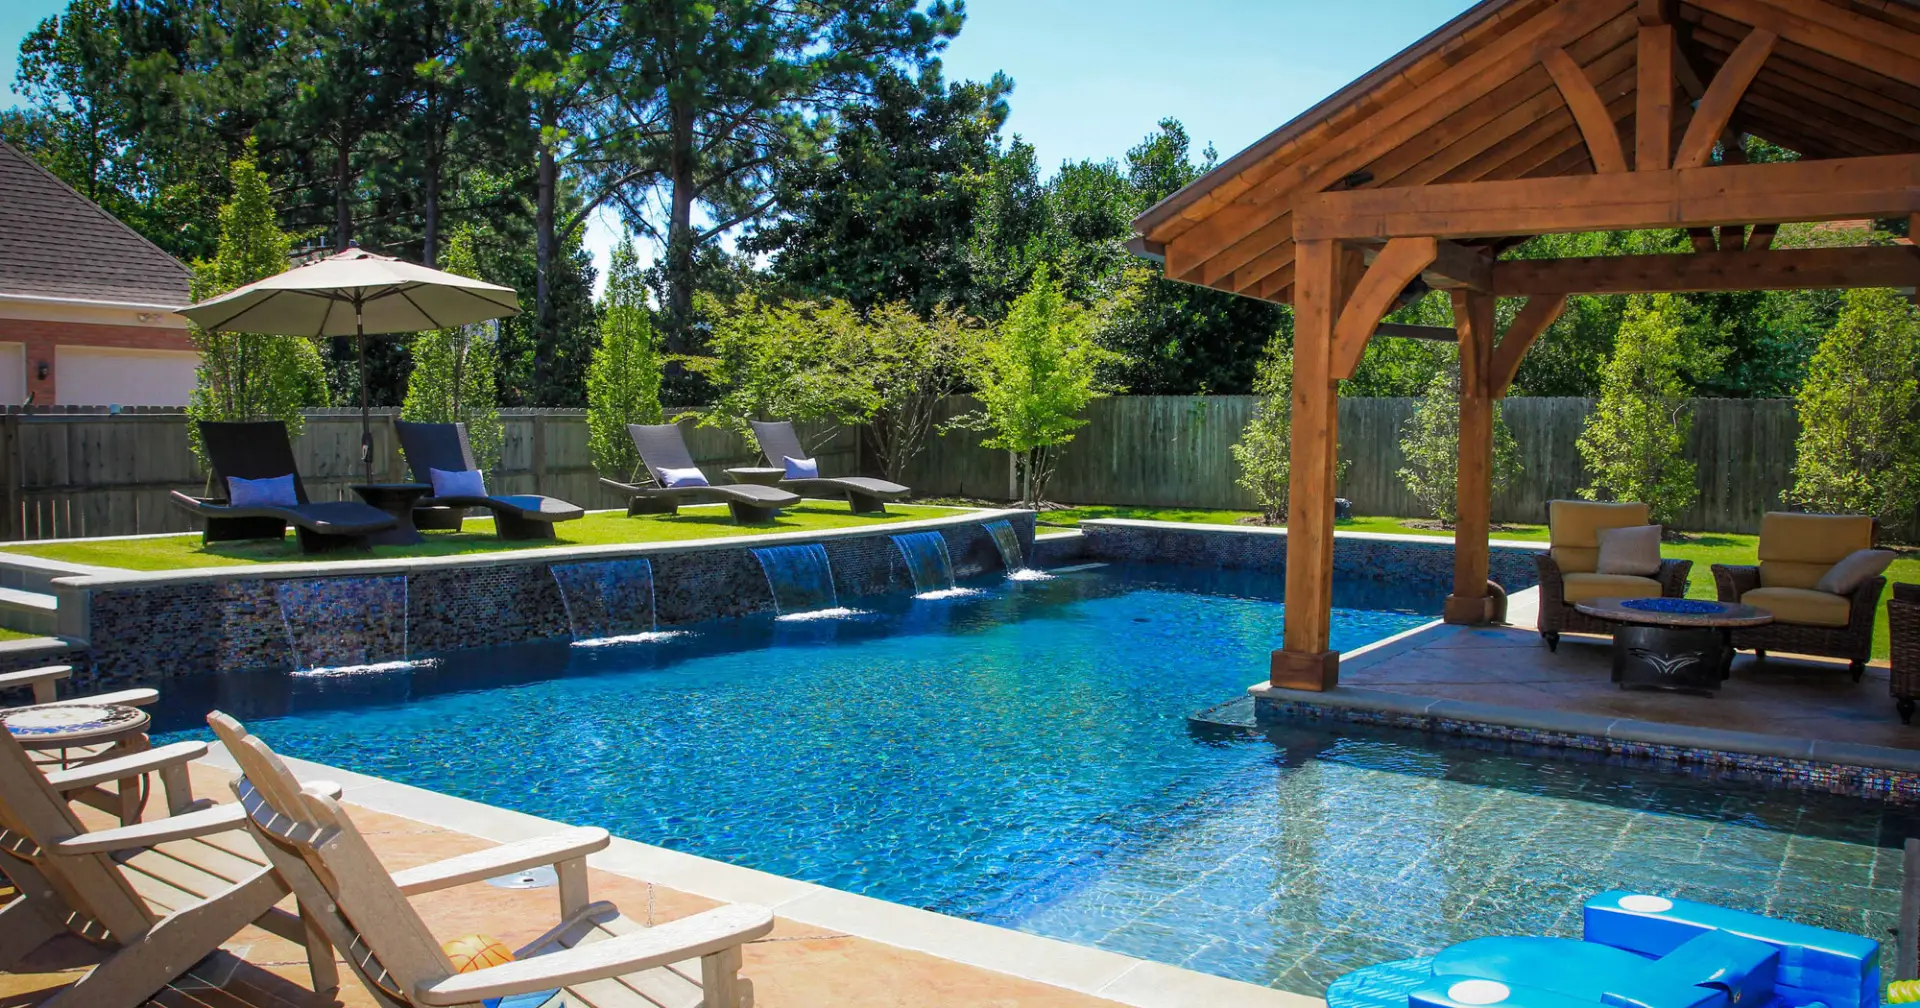 5 Things to Consider When Closing a Pool